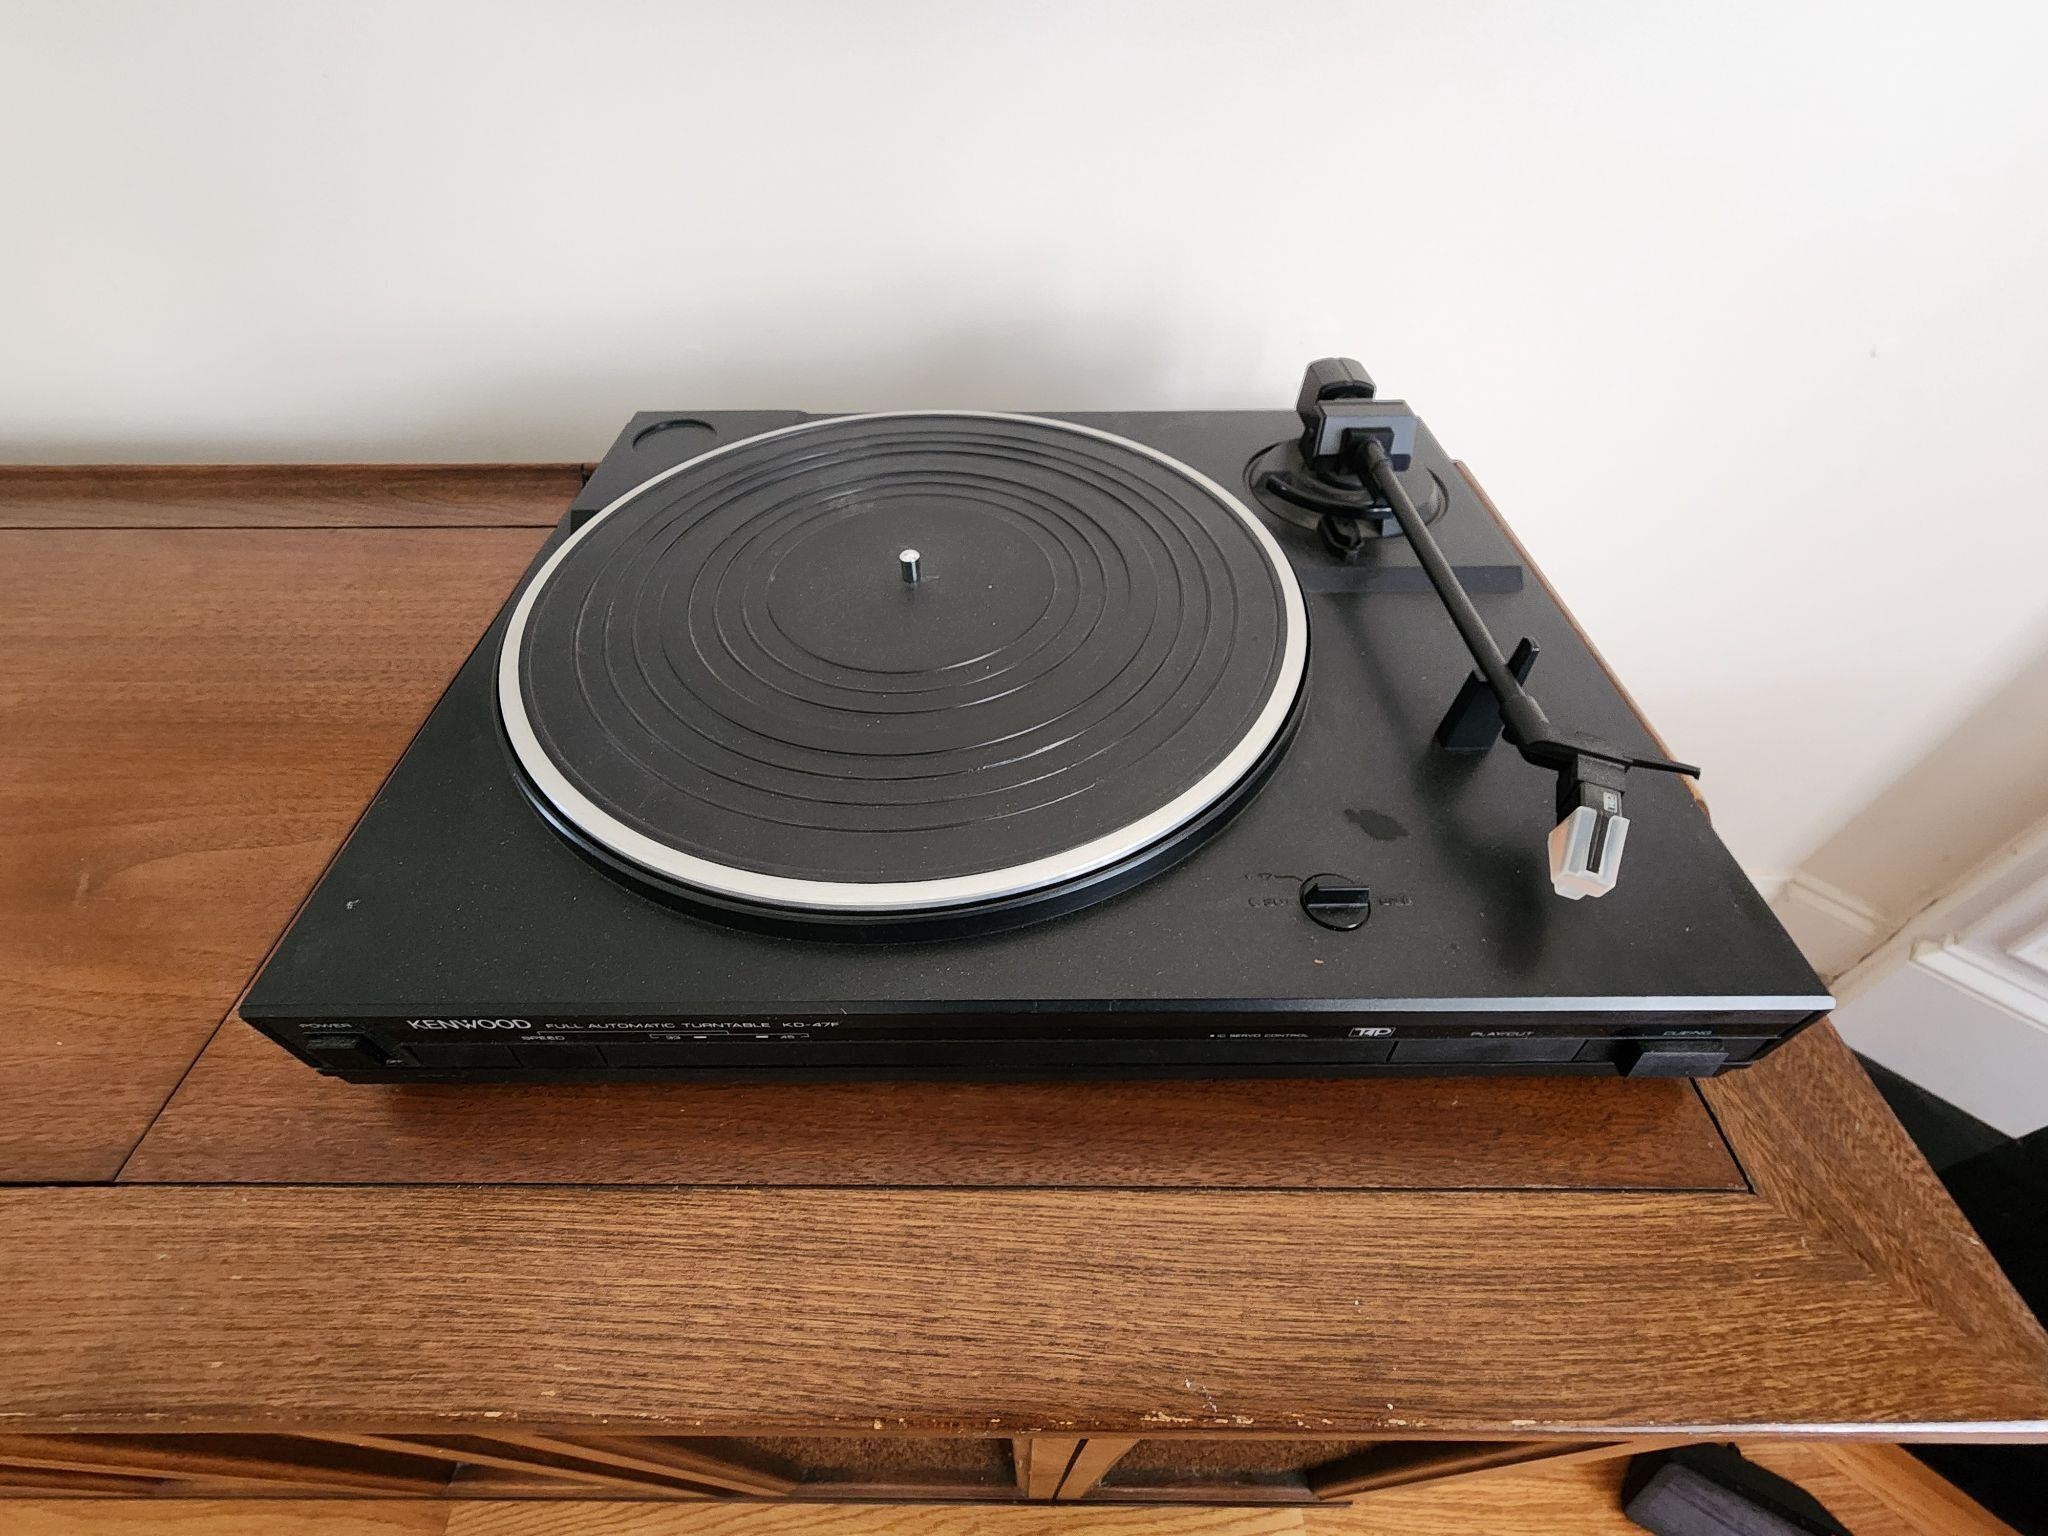 Kenwood record player working as it should